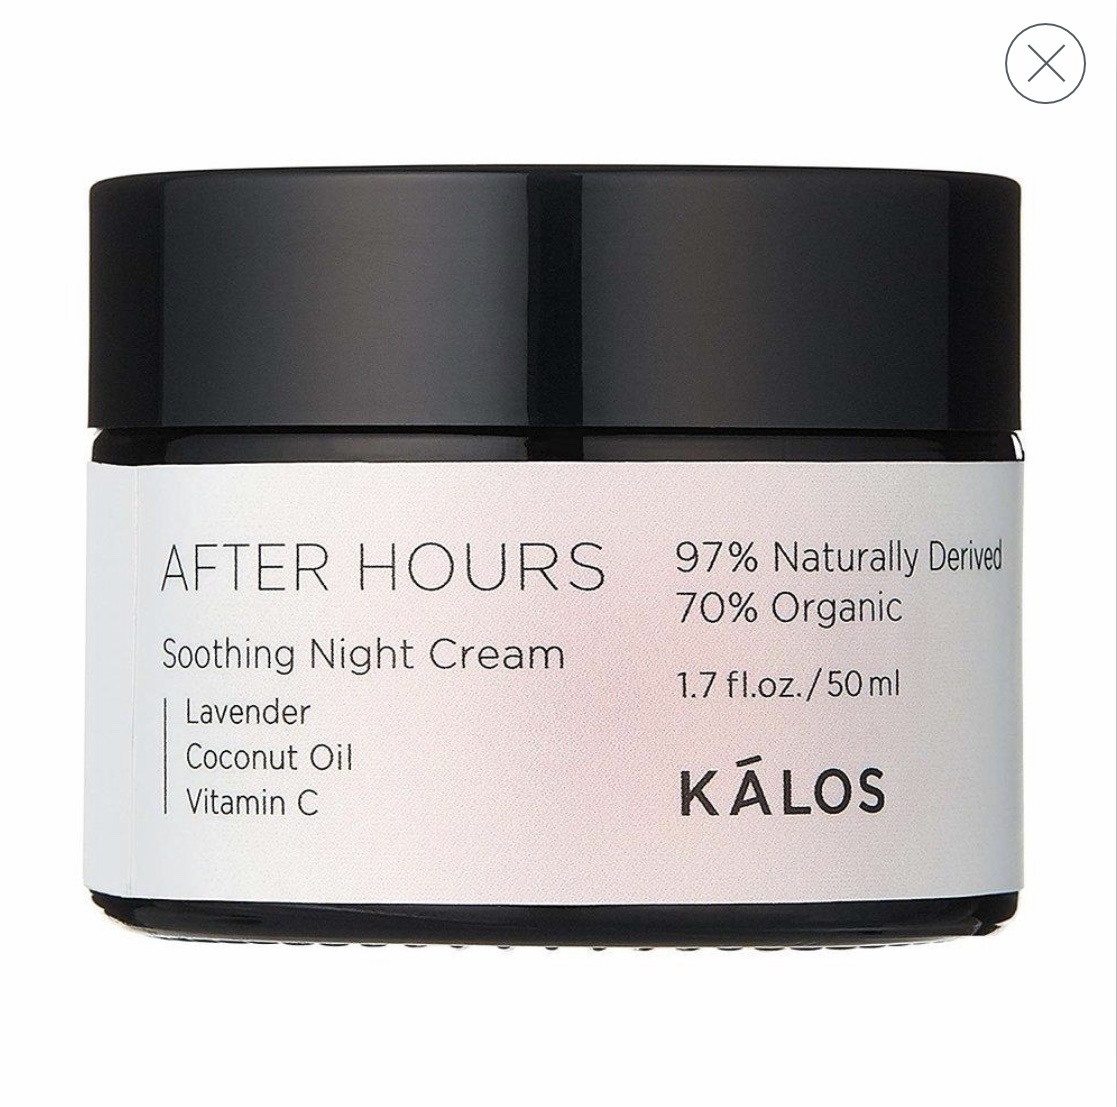 Kalos After Hours Soothing Night Cream